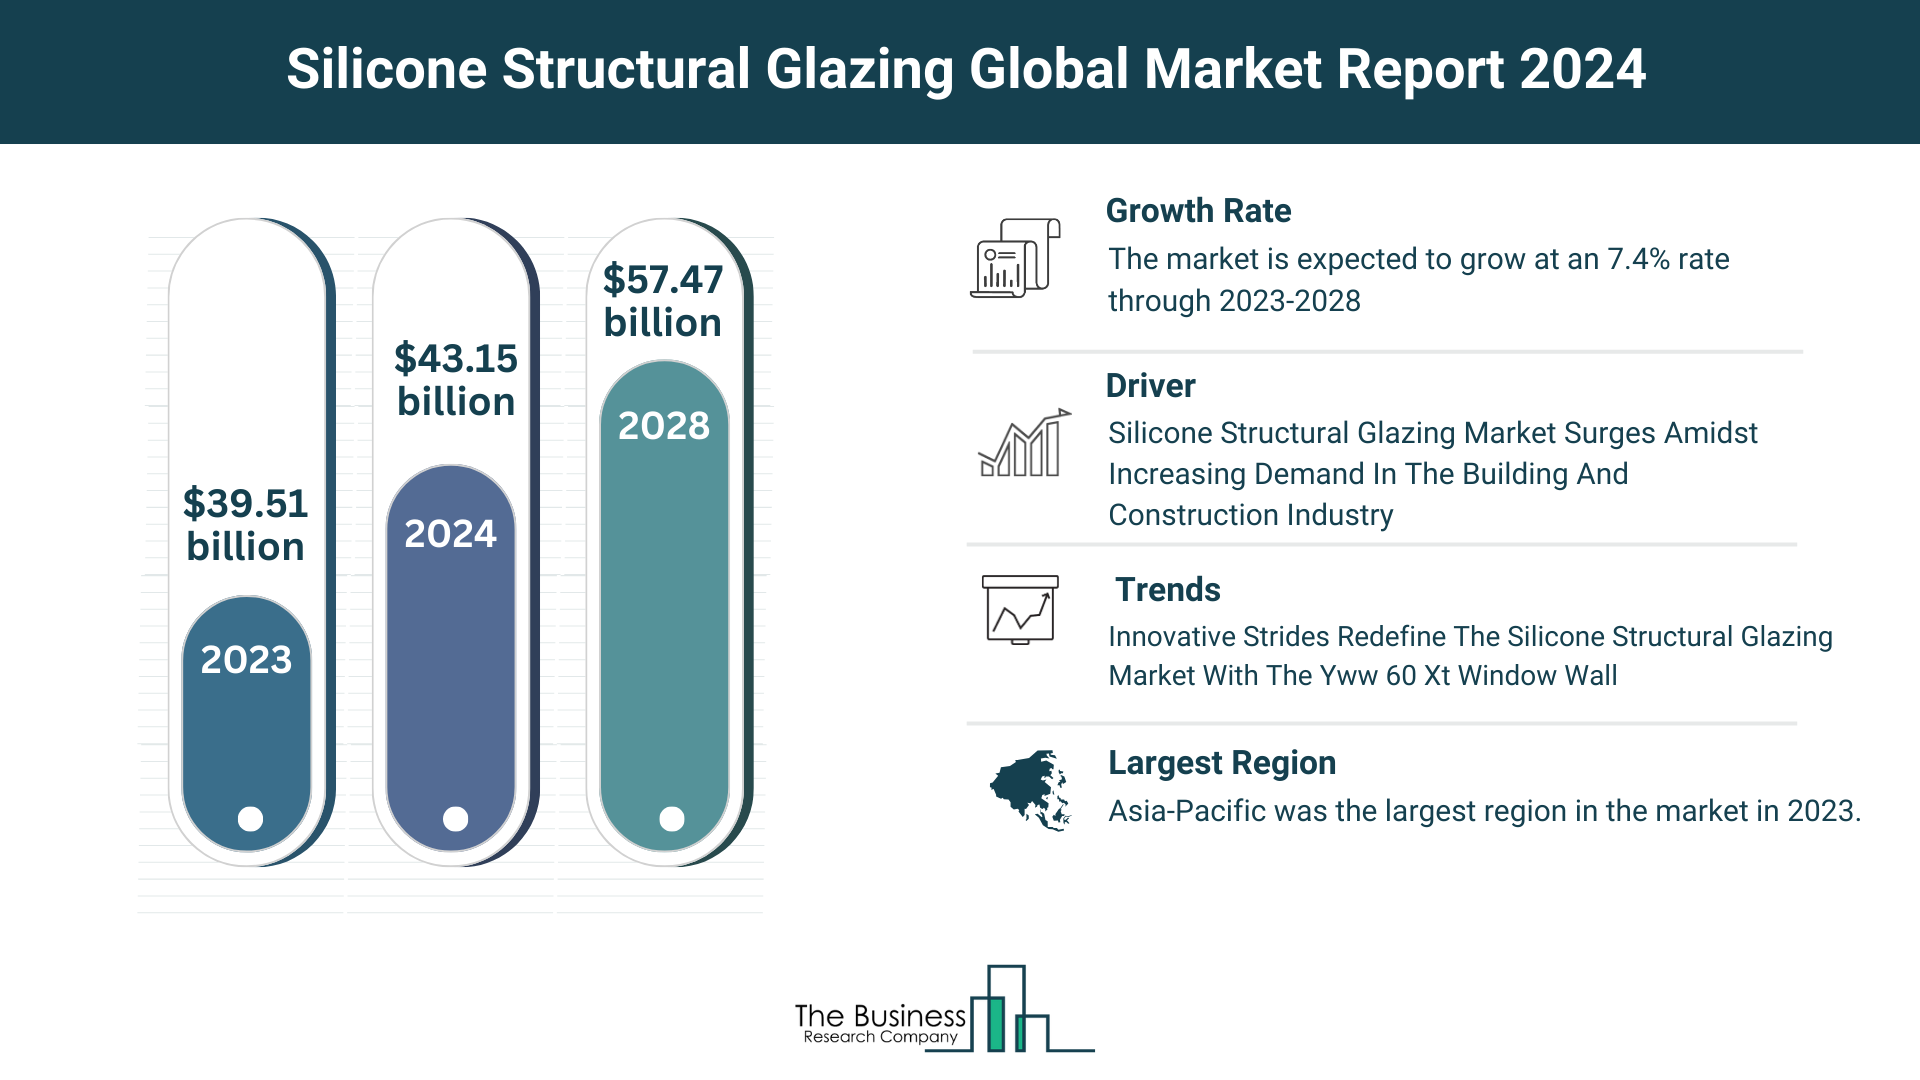 What Are The 5 Top Insights From The Silicone Structural Glazing Market Forecast 2024